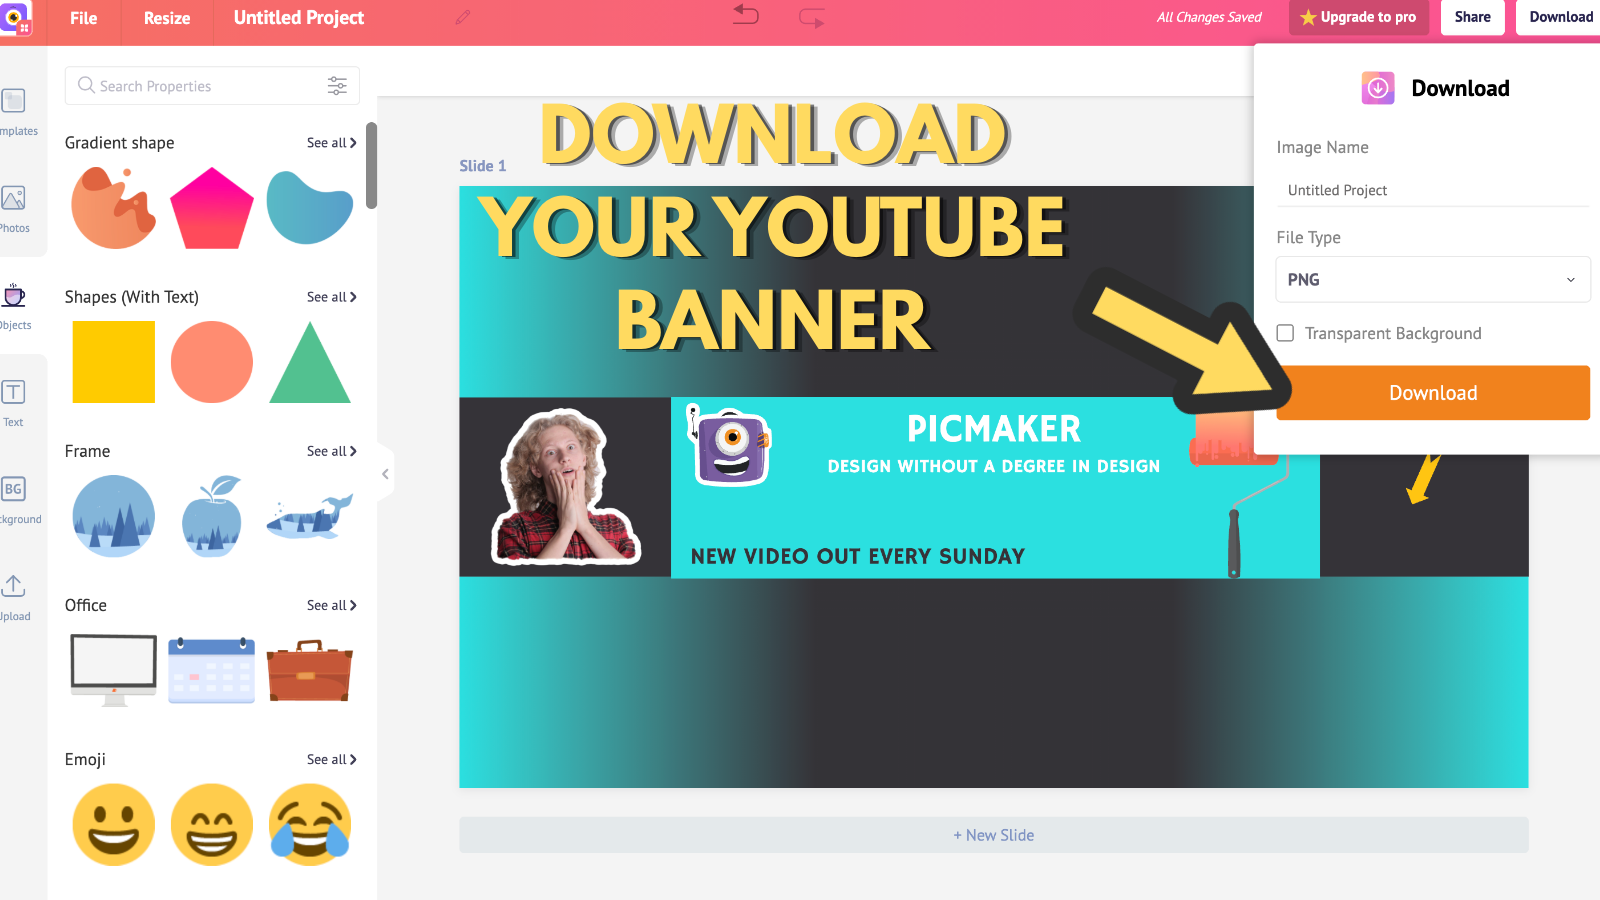 Screenshot that asks to download your youtube banner (to make YouTube banner)